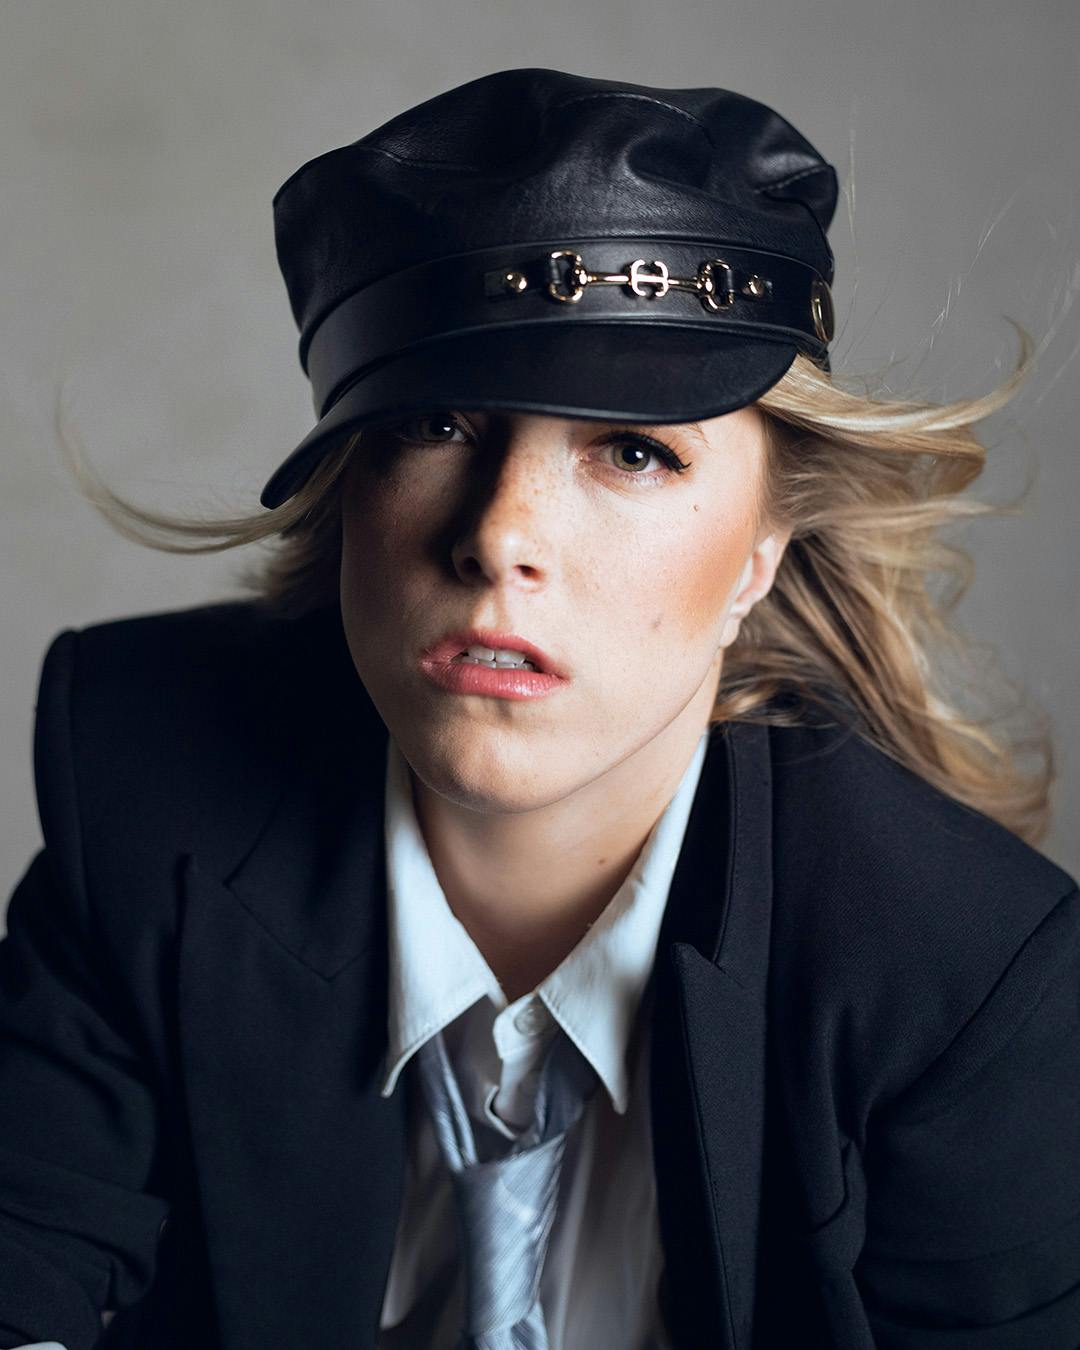 Girl wearing black hat and outfit.